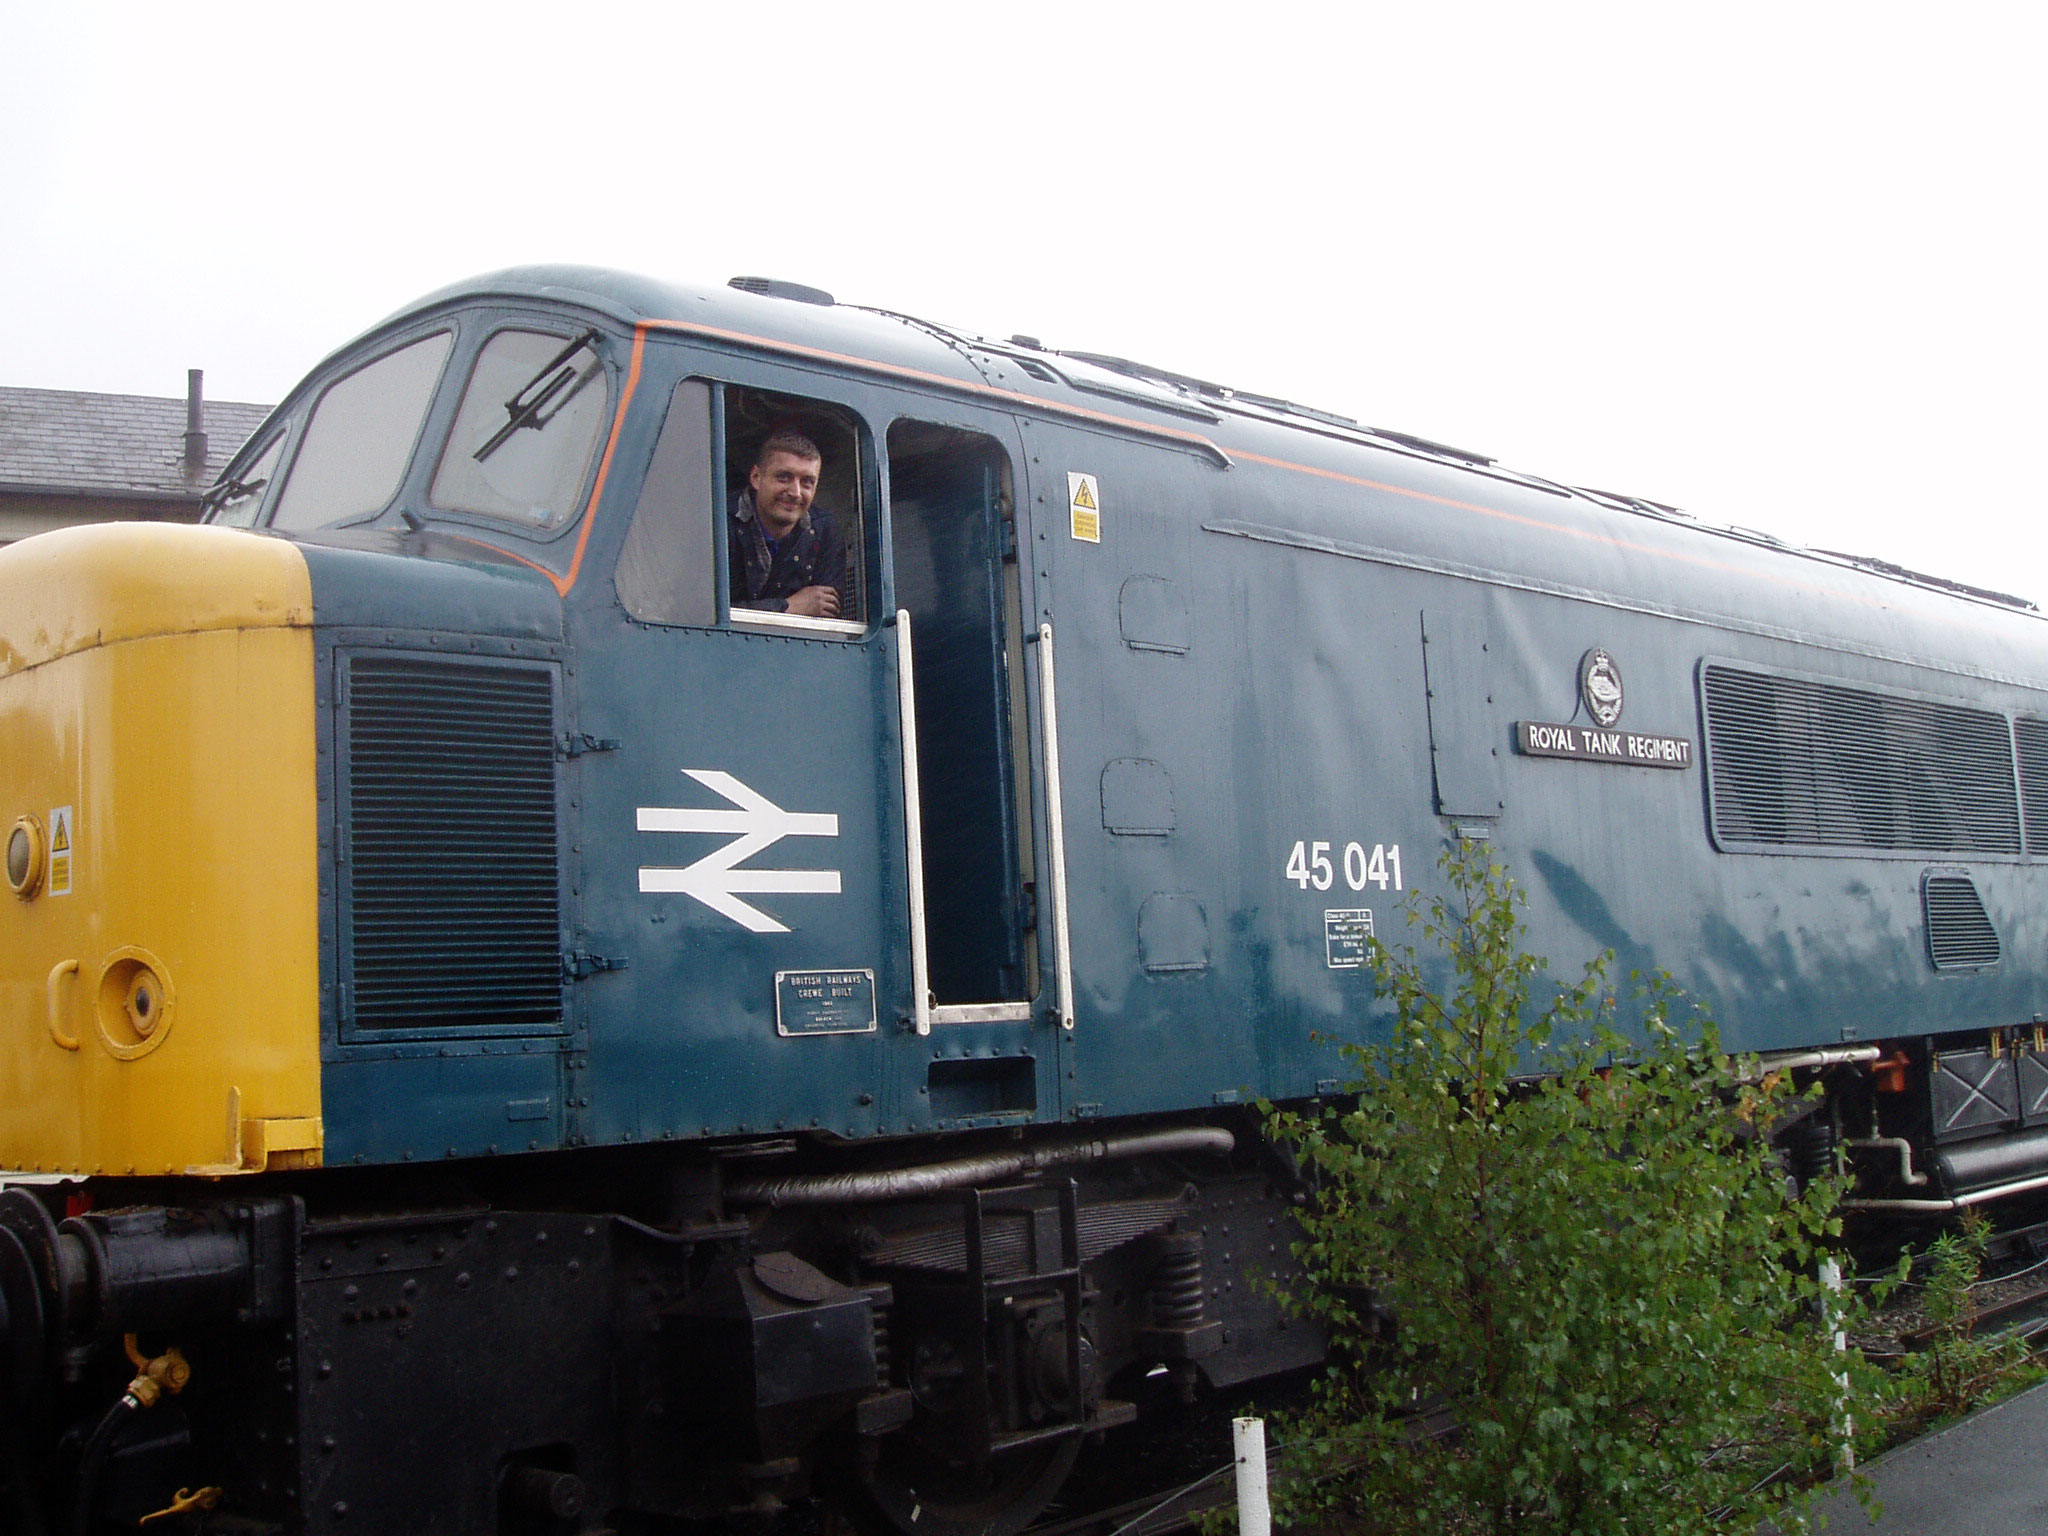 The loco's driver posing whilst working the loco at The Midland Railway Centre